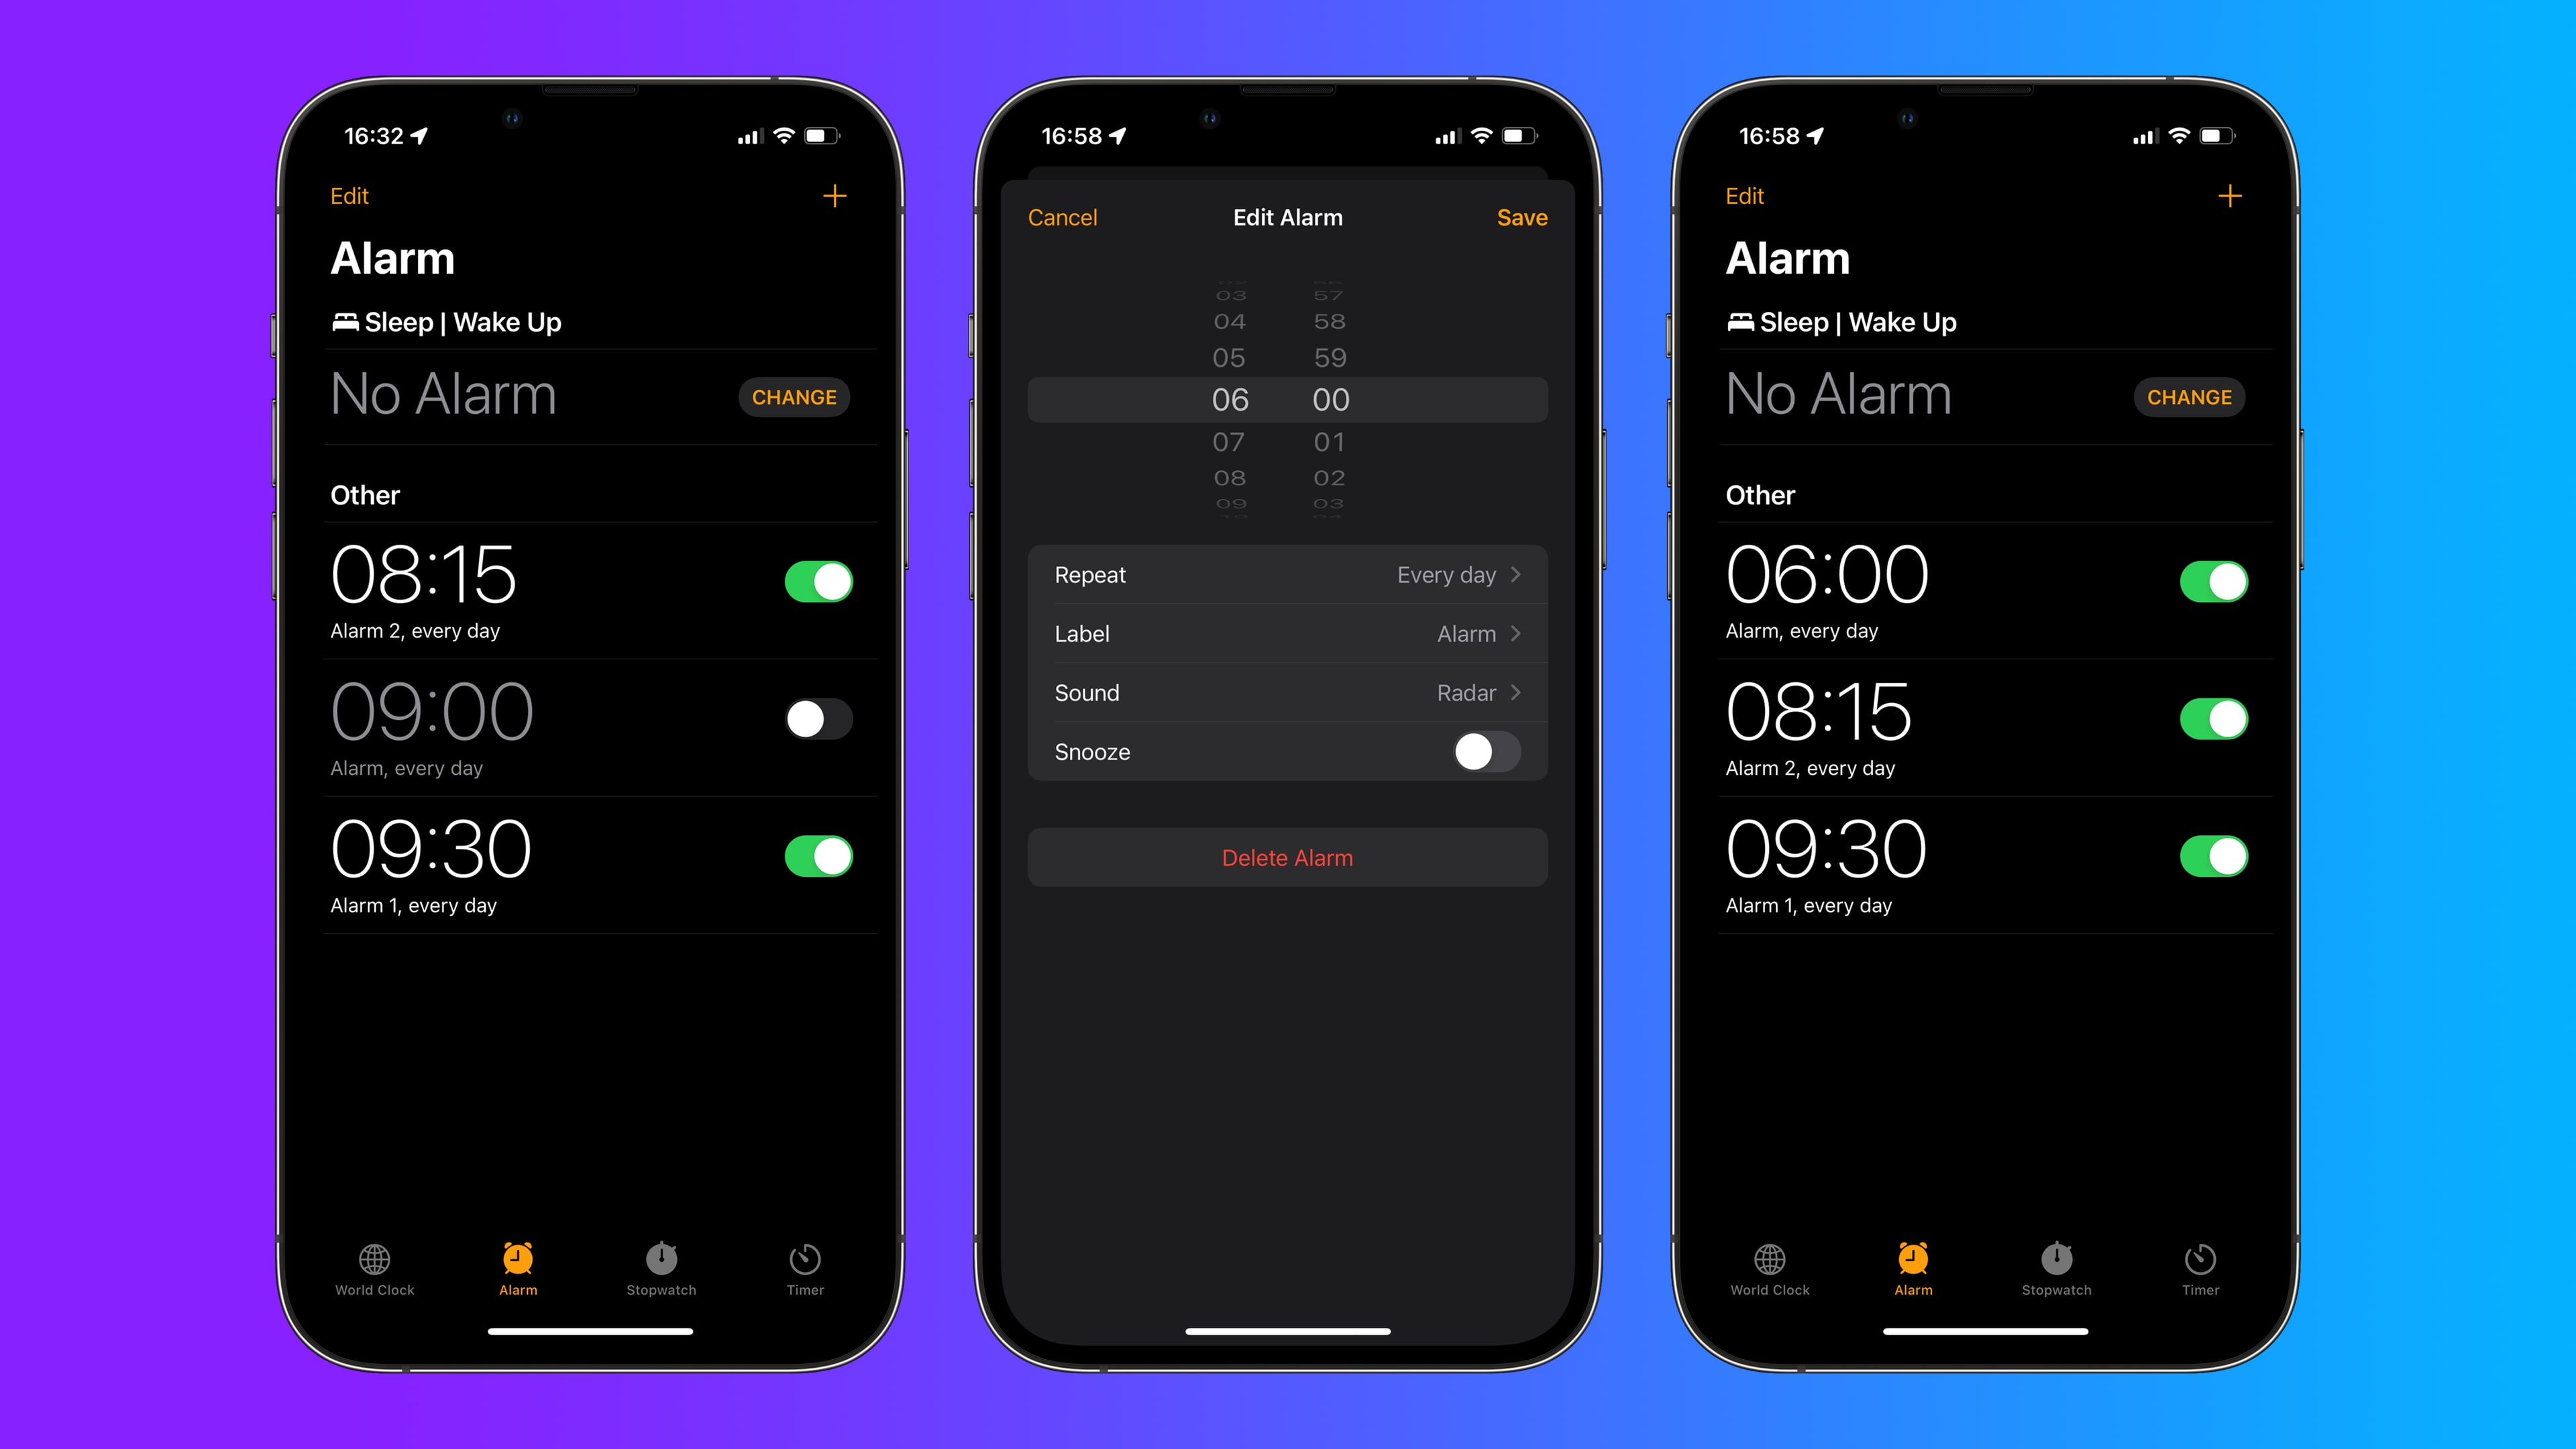 Three iPhone screenshots showing how to just edit an existing alarm without touching the Edit button first 